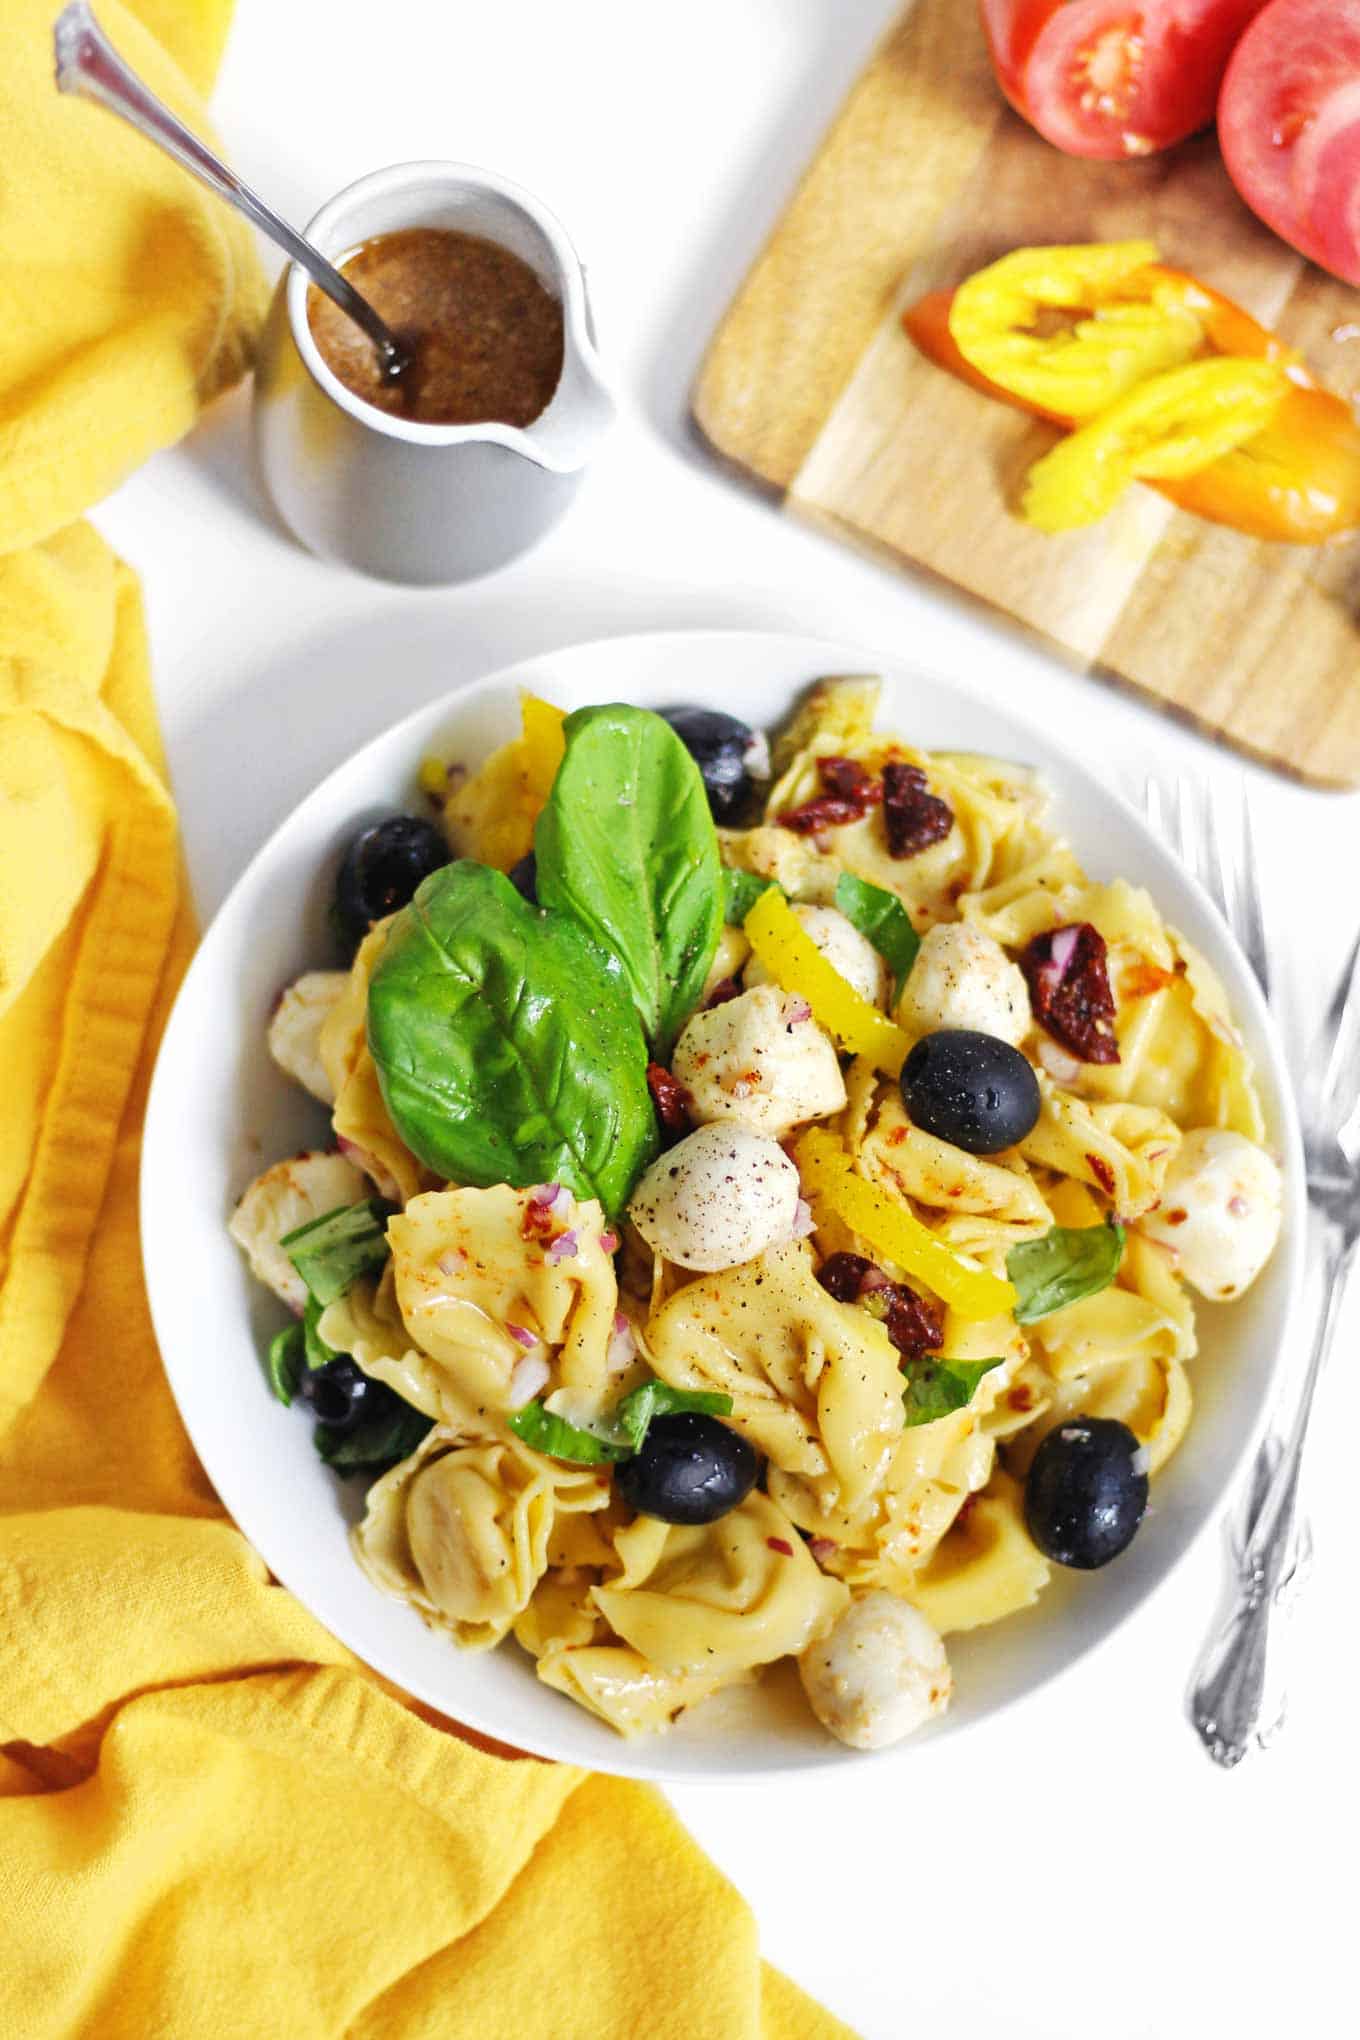 A picture of Italian tortellini salad with basil leaves in a white bowl next to a yellow cloth napkin.